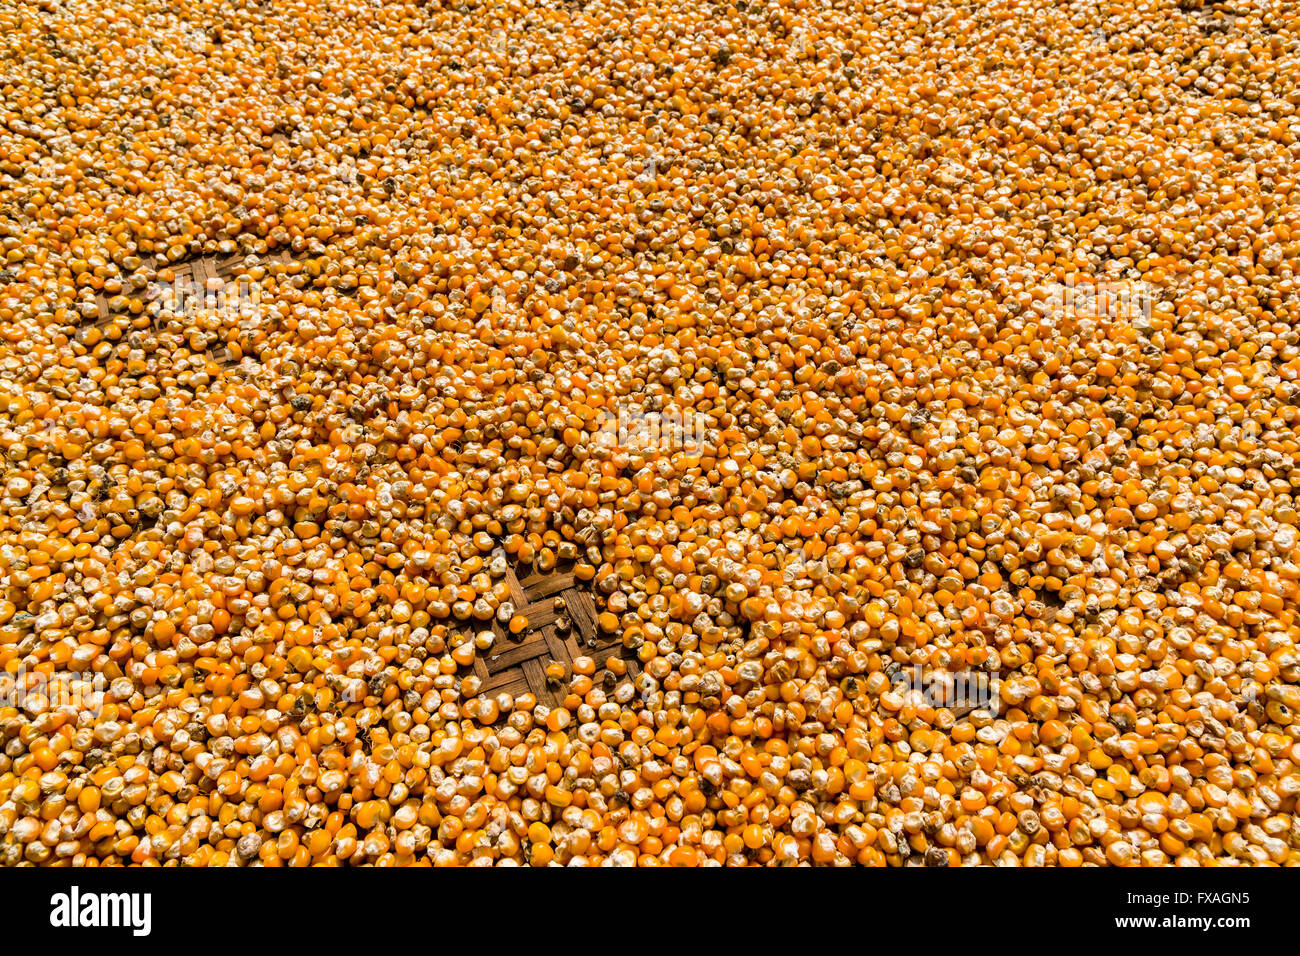 Corn is spread out on a woven plate to dry in the sun, Bung, Solo Khumbu, Nepal Stock Photo